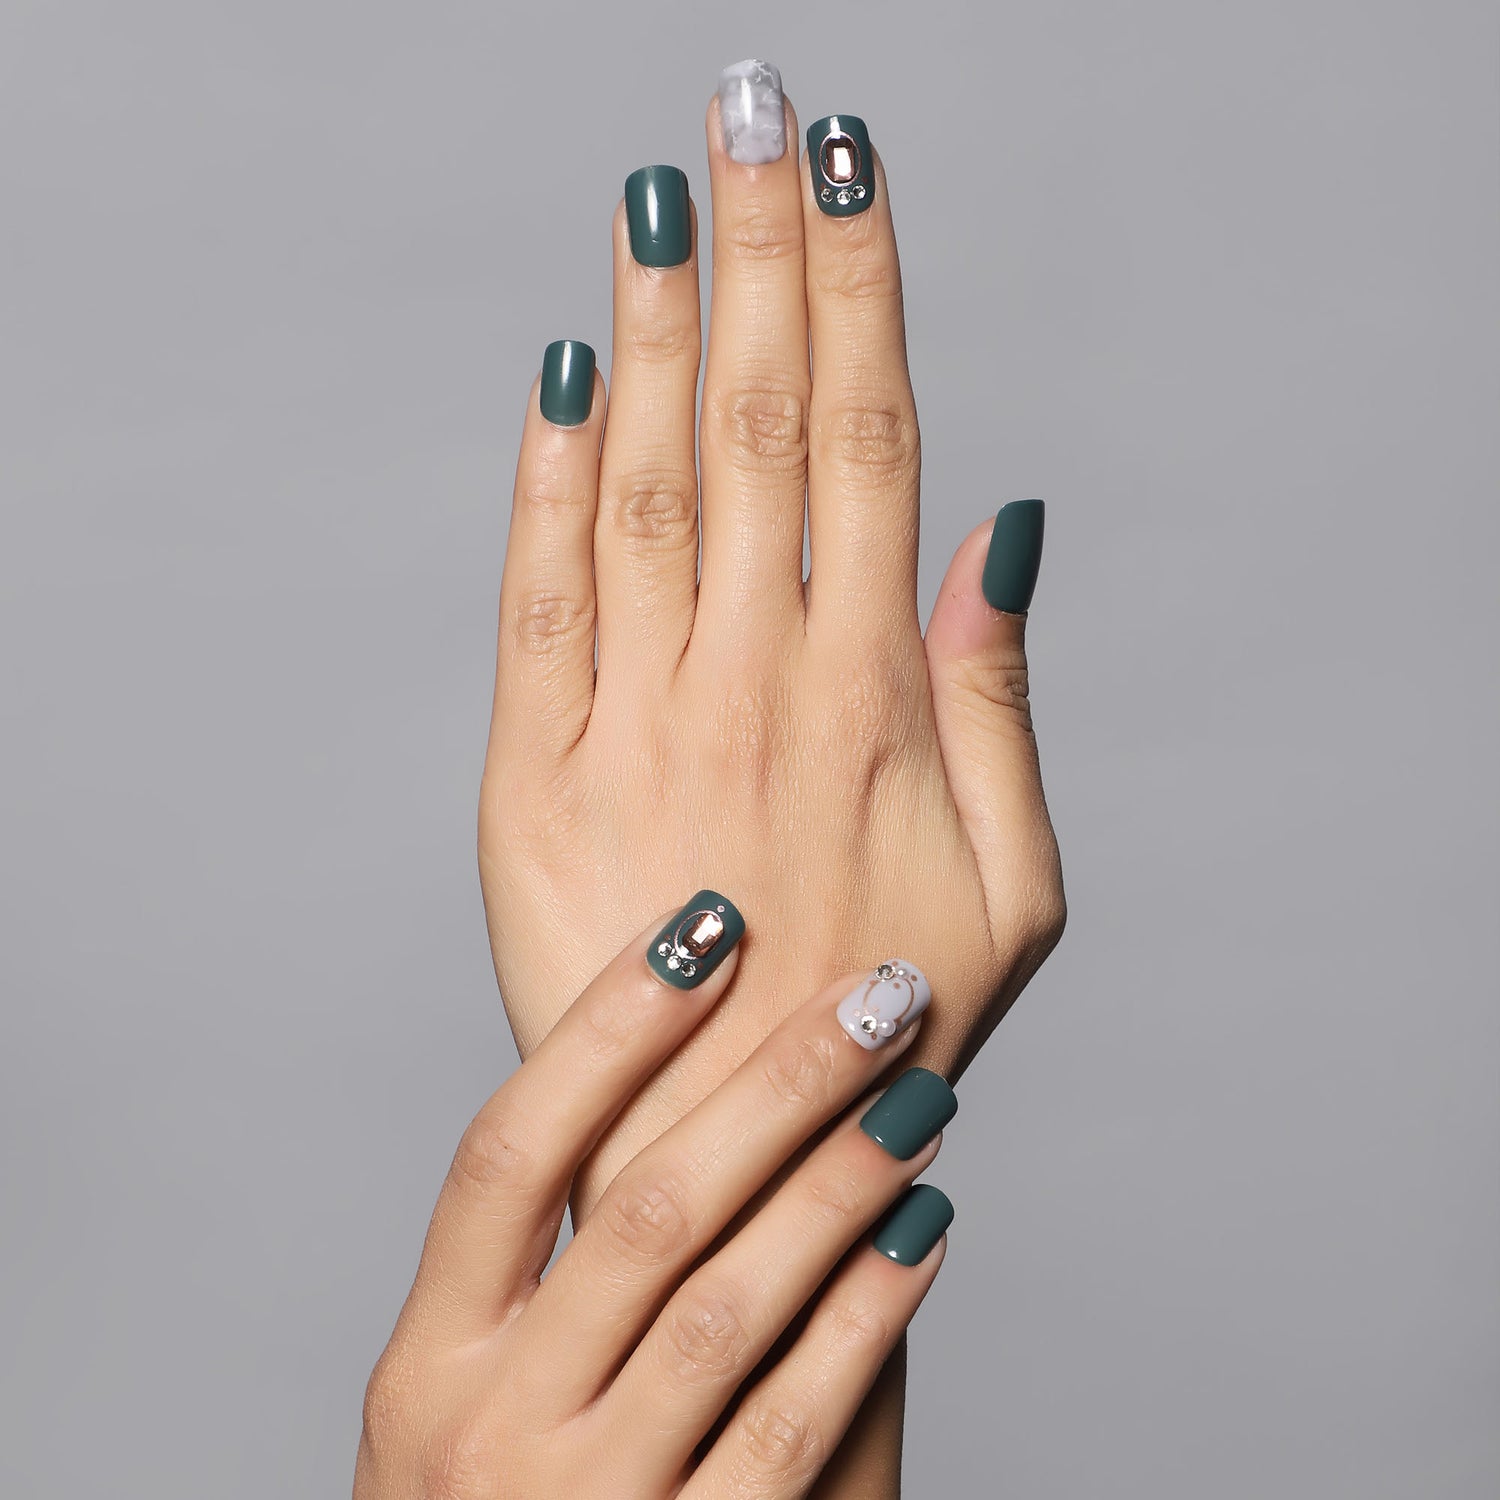 Sage Green nails that you can try! | Gallery posted by Trendy Nails | Lemon8